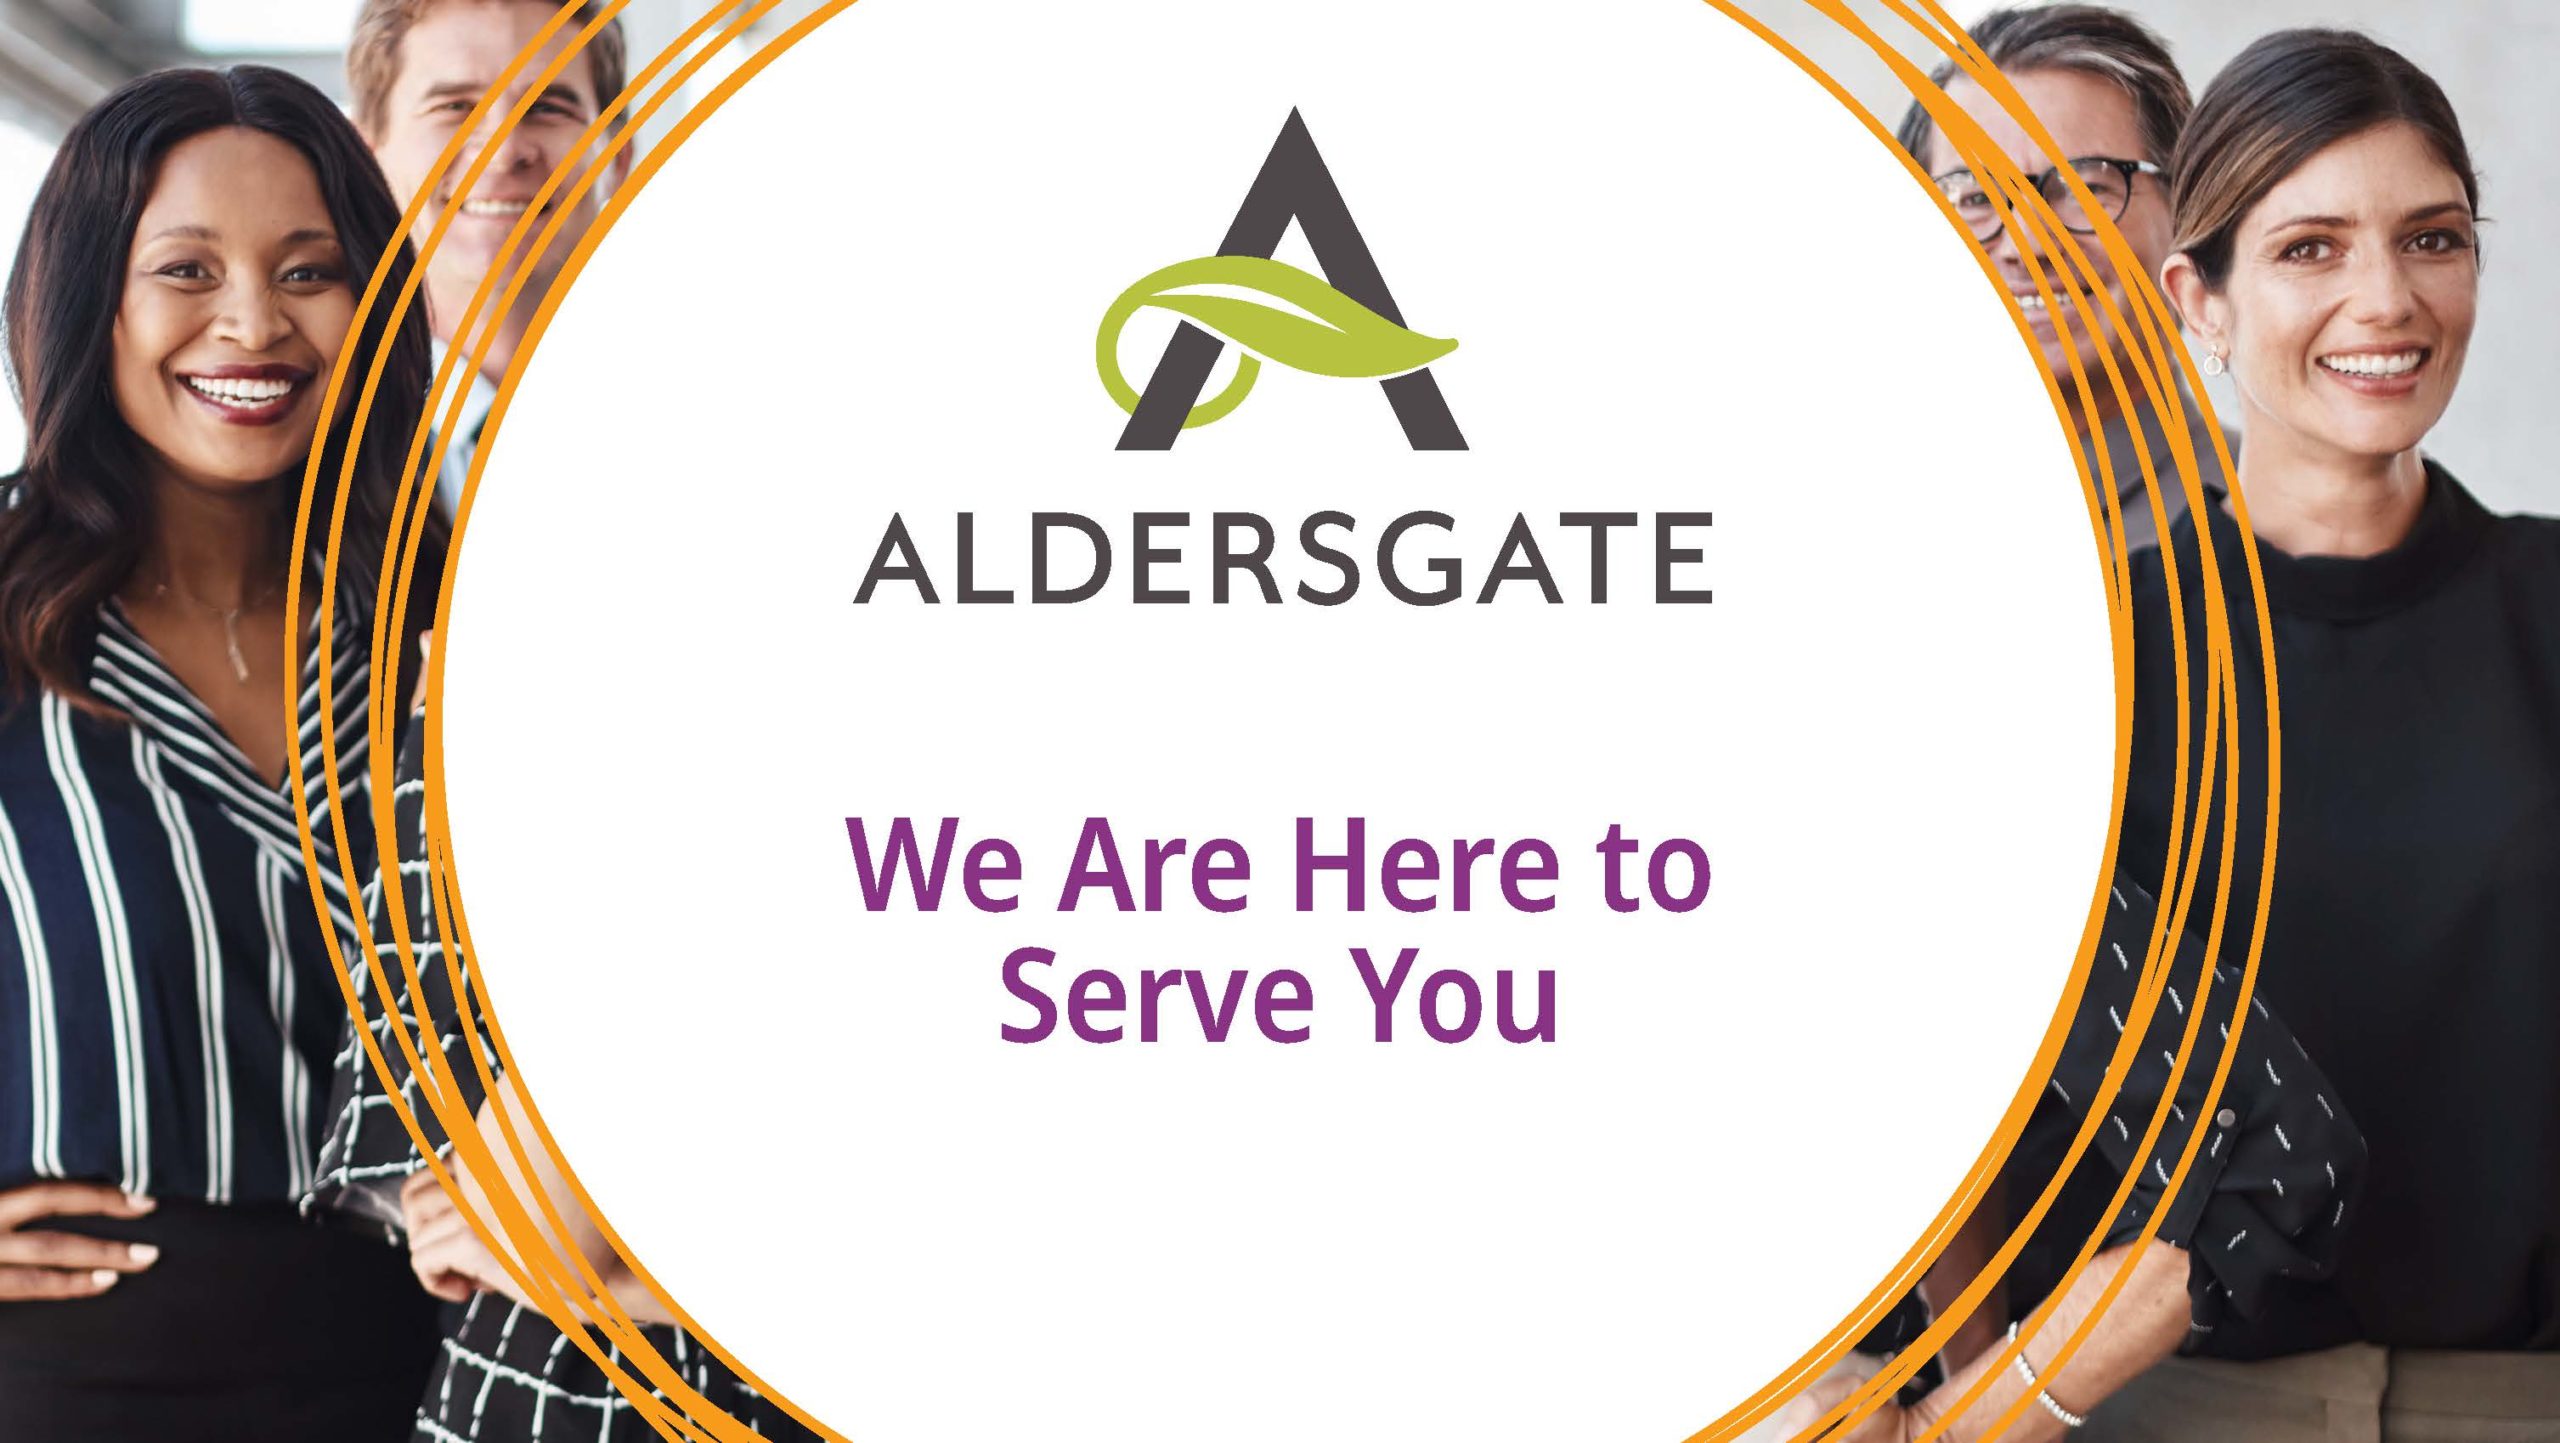 We are here to serve you - Aldersgate Life Plan Community